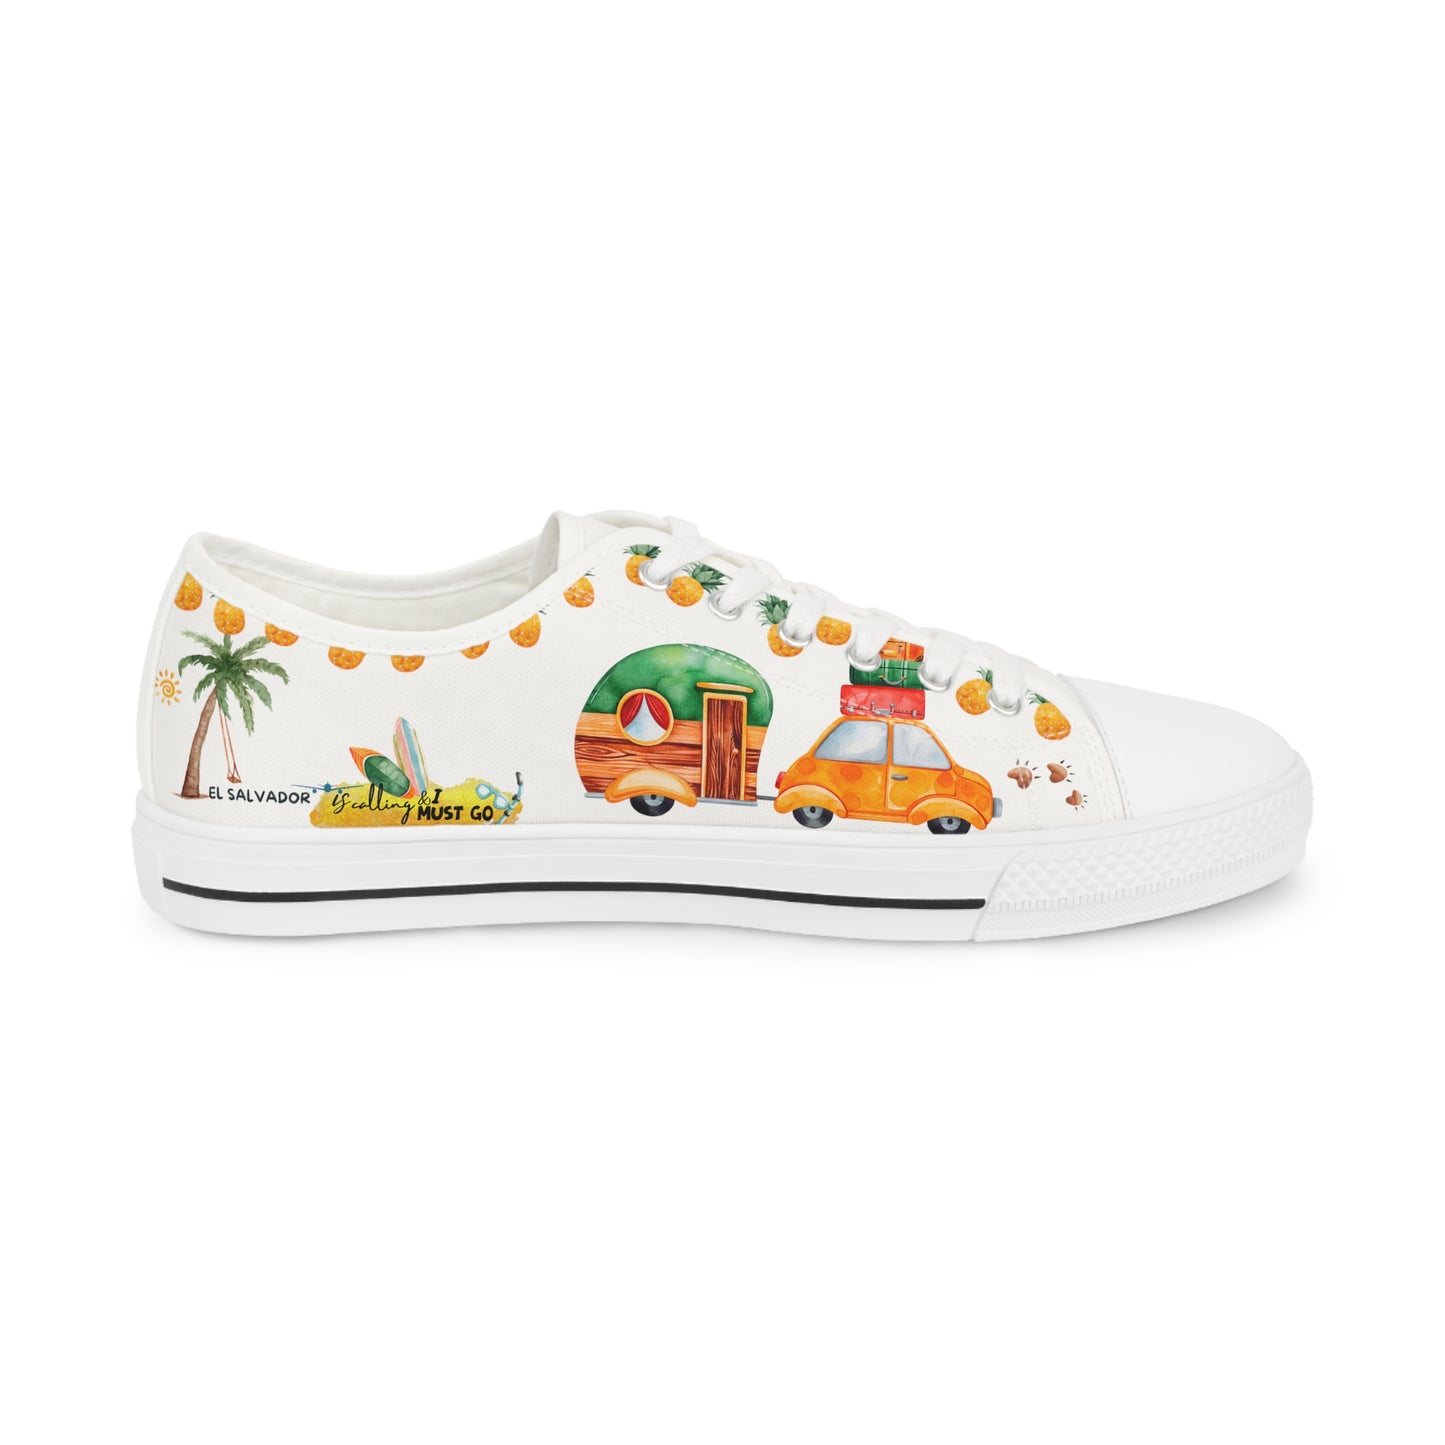 El Salvador is calling & i must Go- Travel Edition - White Background Men's Sneakers